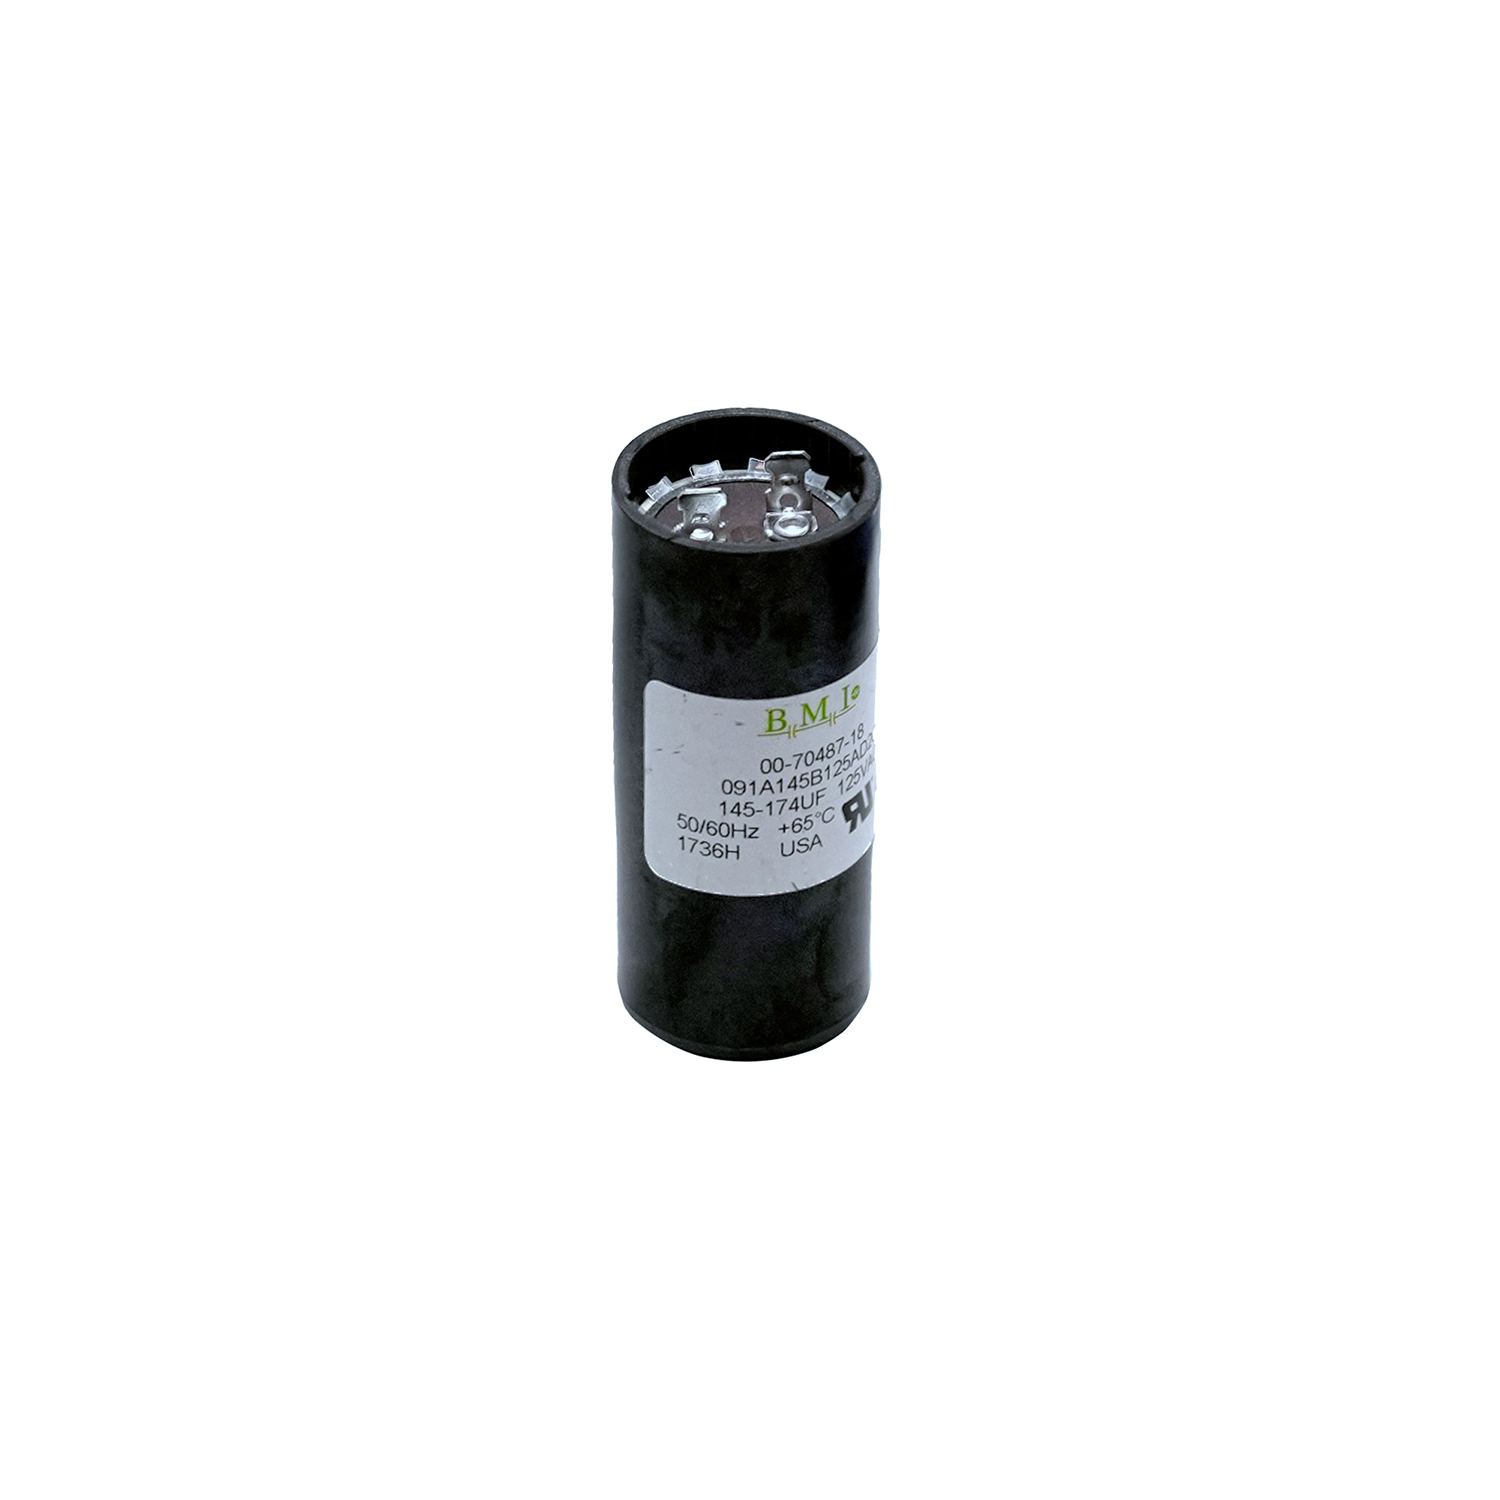 Capacitor - Motor, for Hobart Mixers A200 OEM # 00-070487-00018